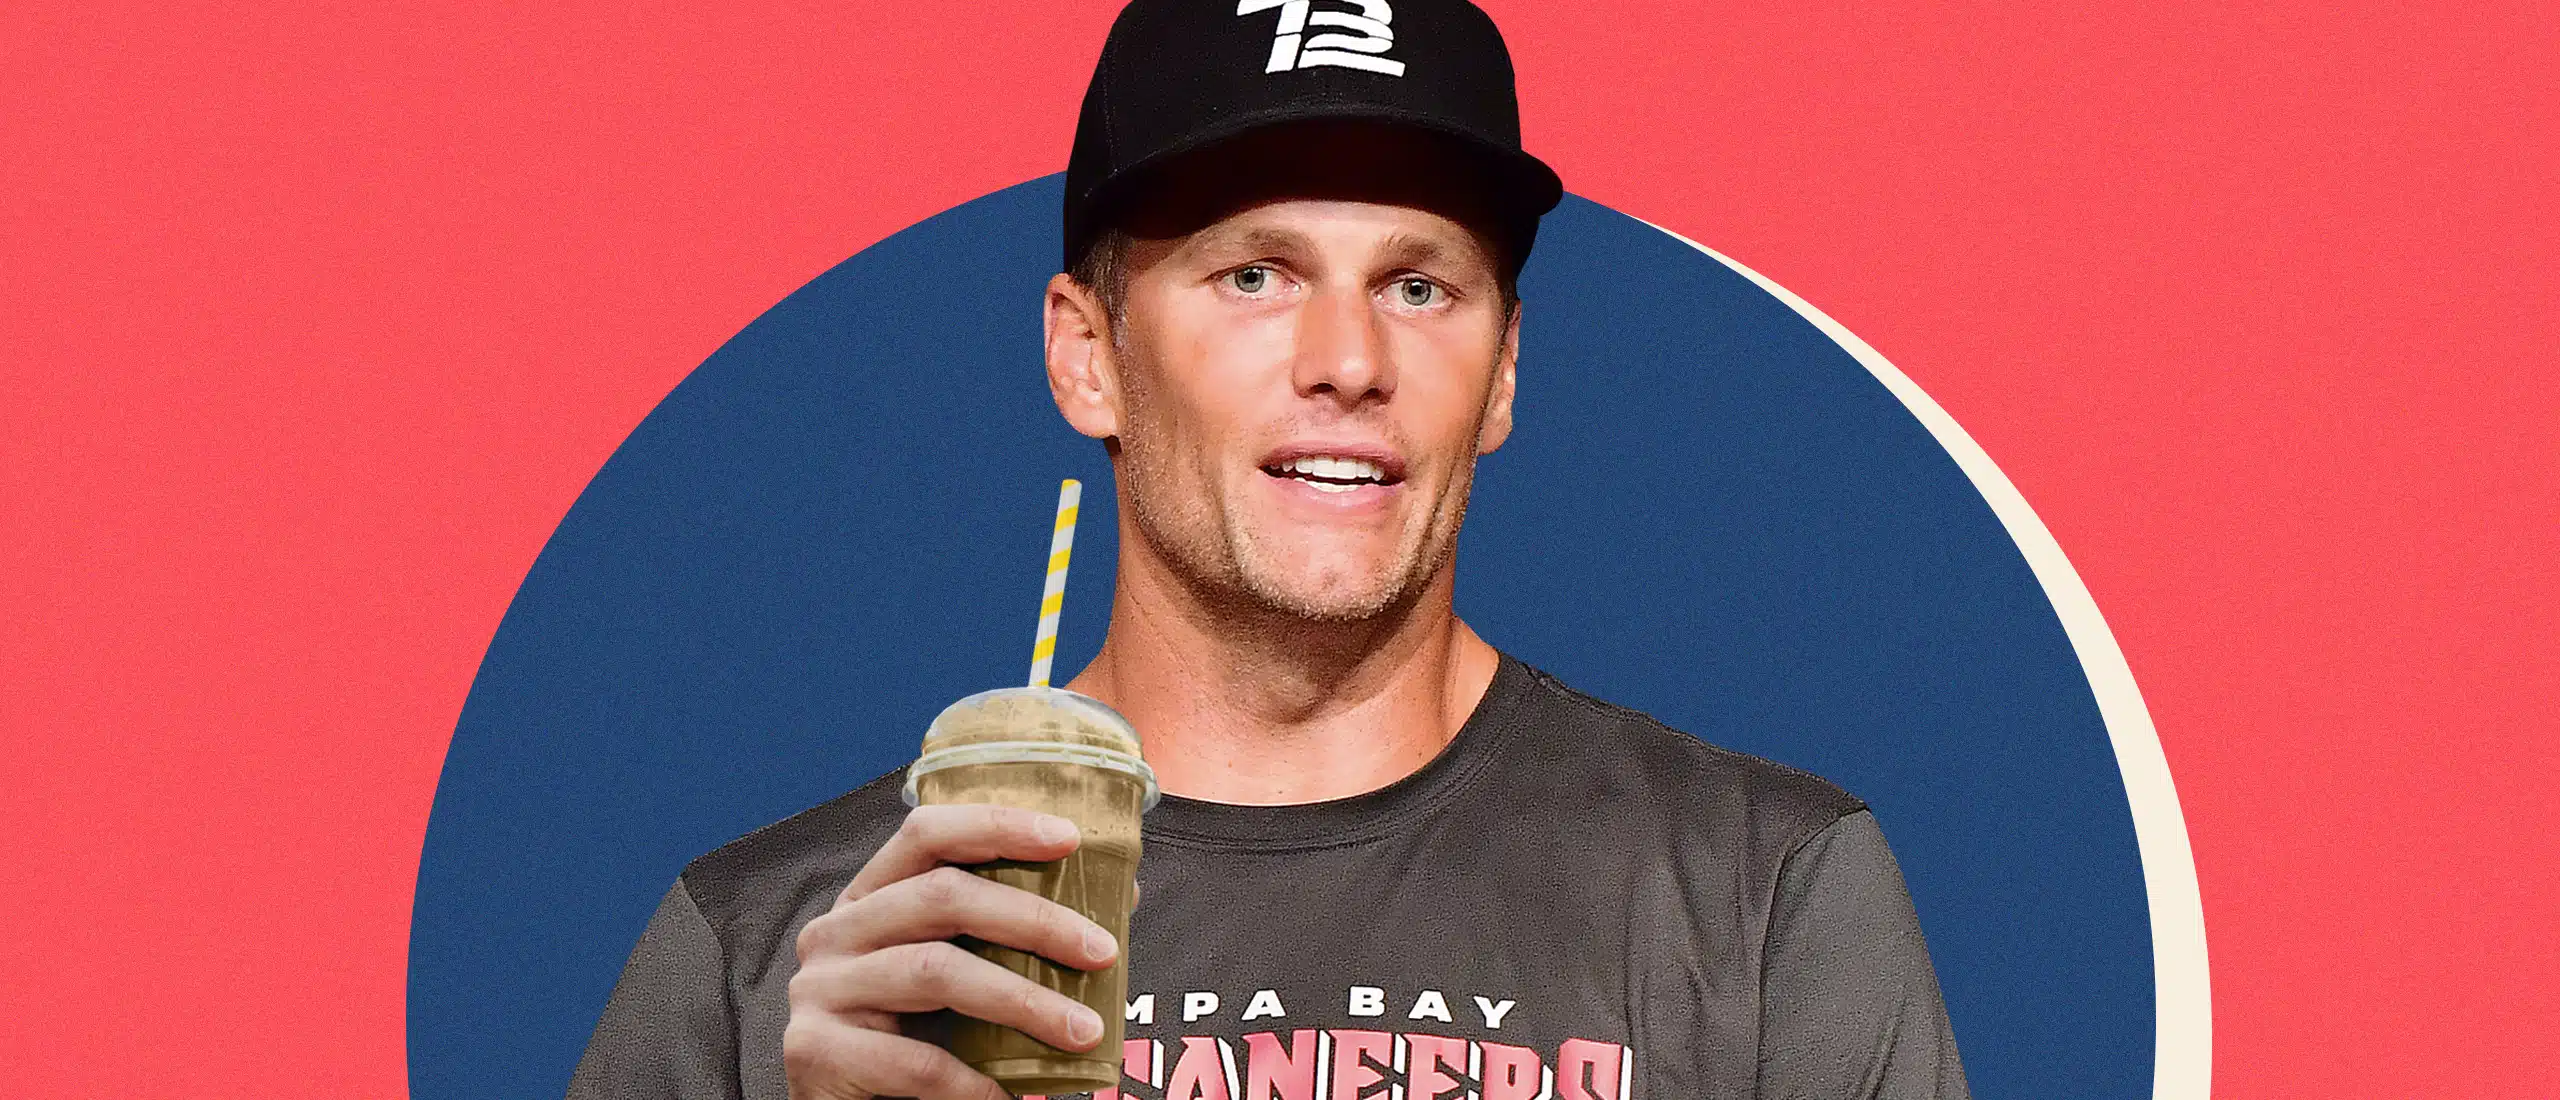 Tom Brady on a red and blue background holding a smoothie.